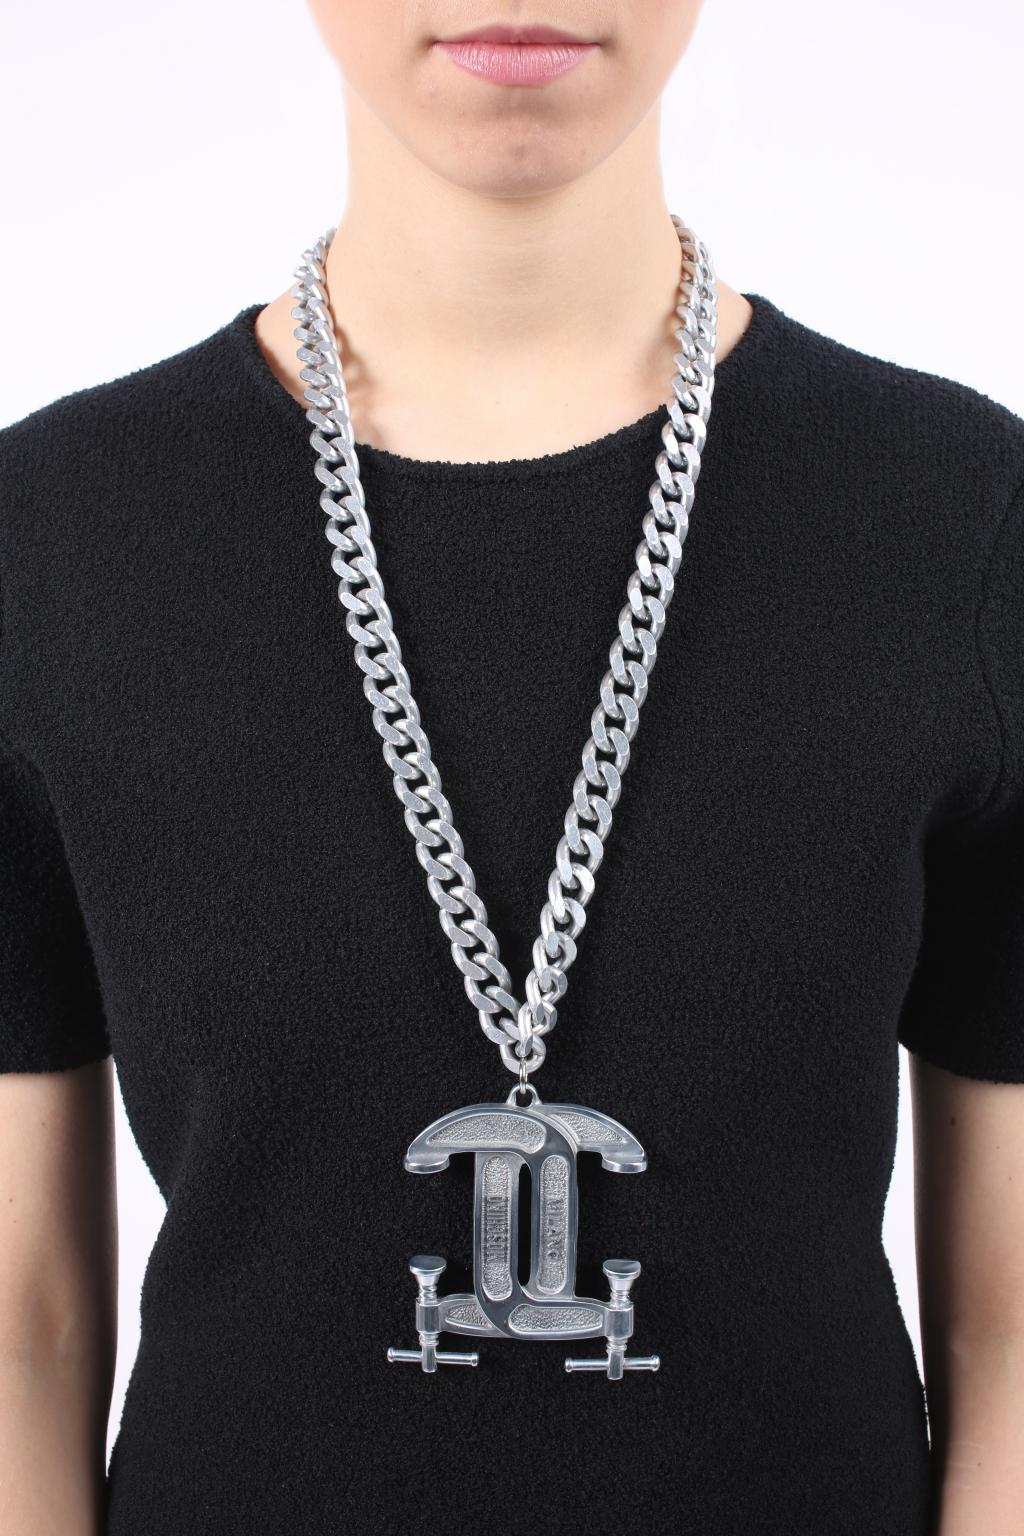 moschino chain necklace